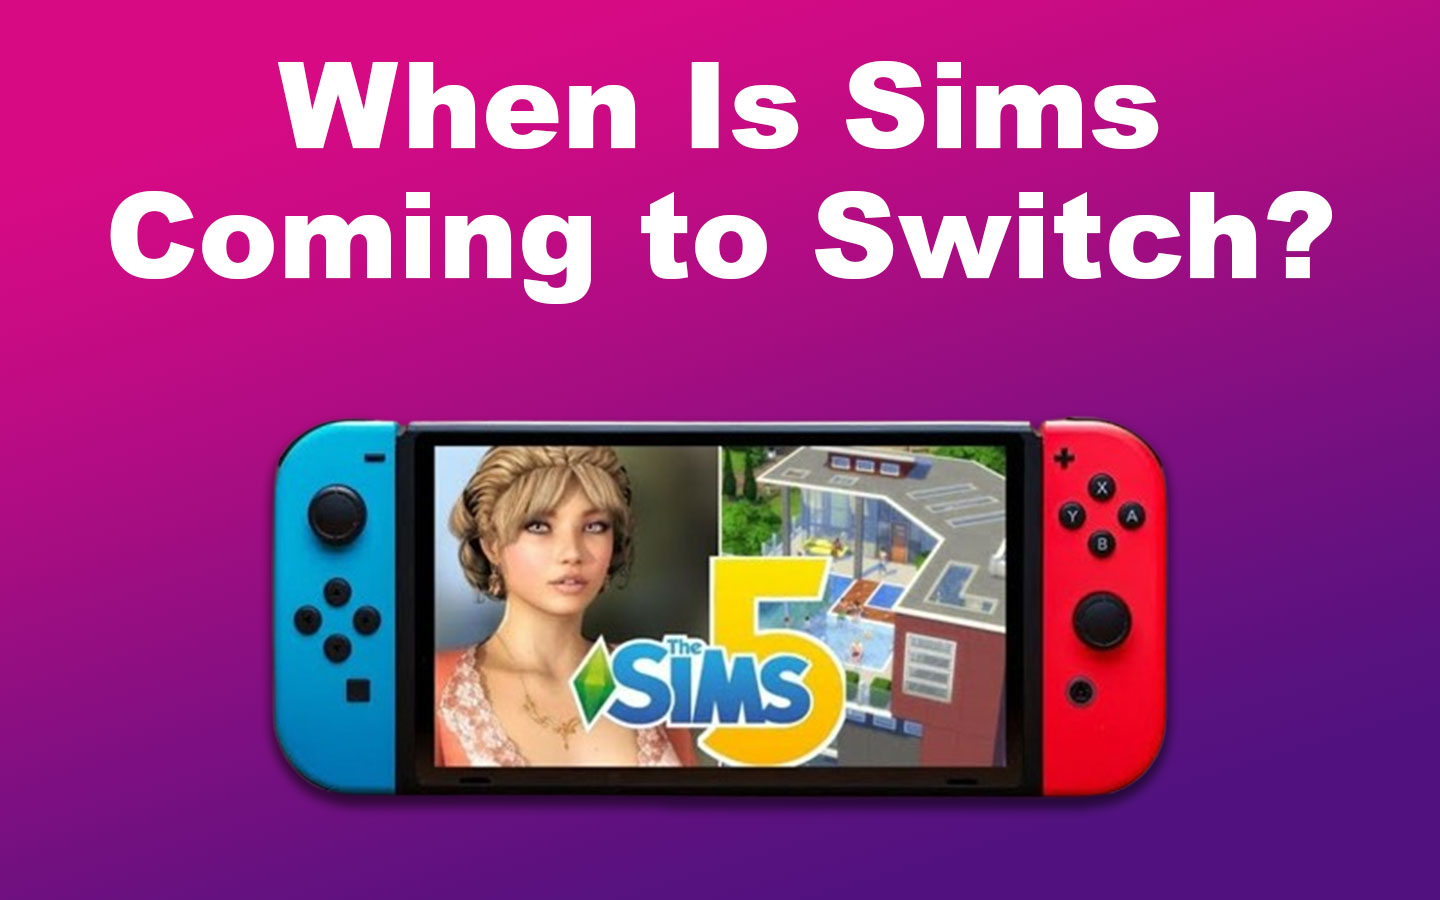 When Is Sims Coming to Switch?